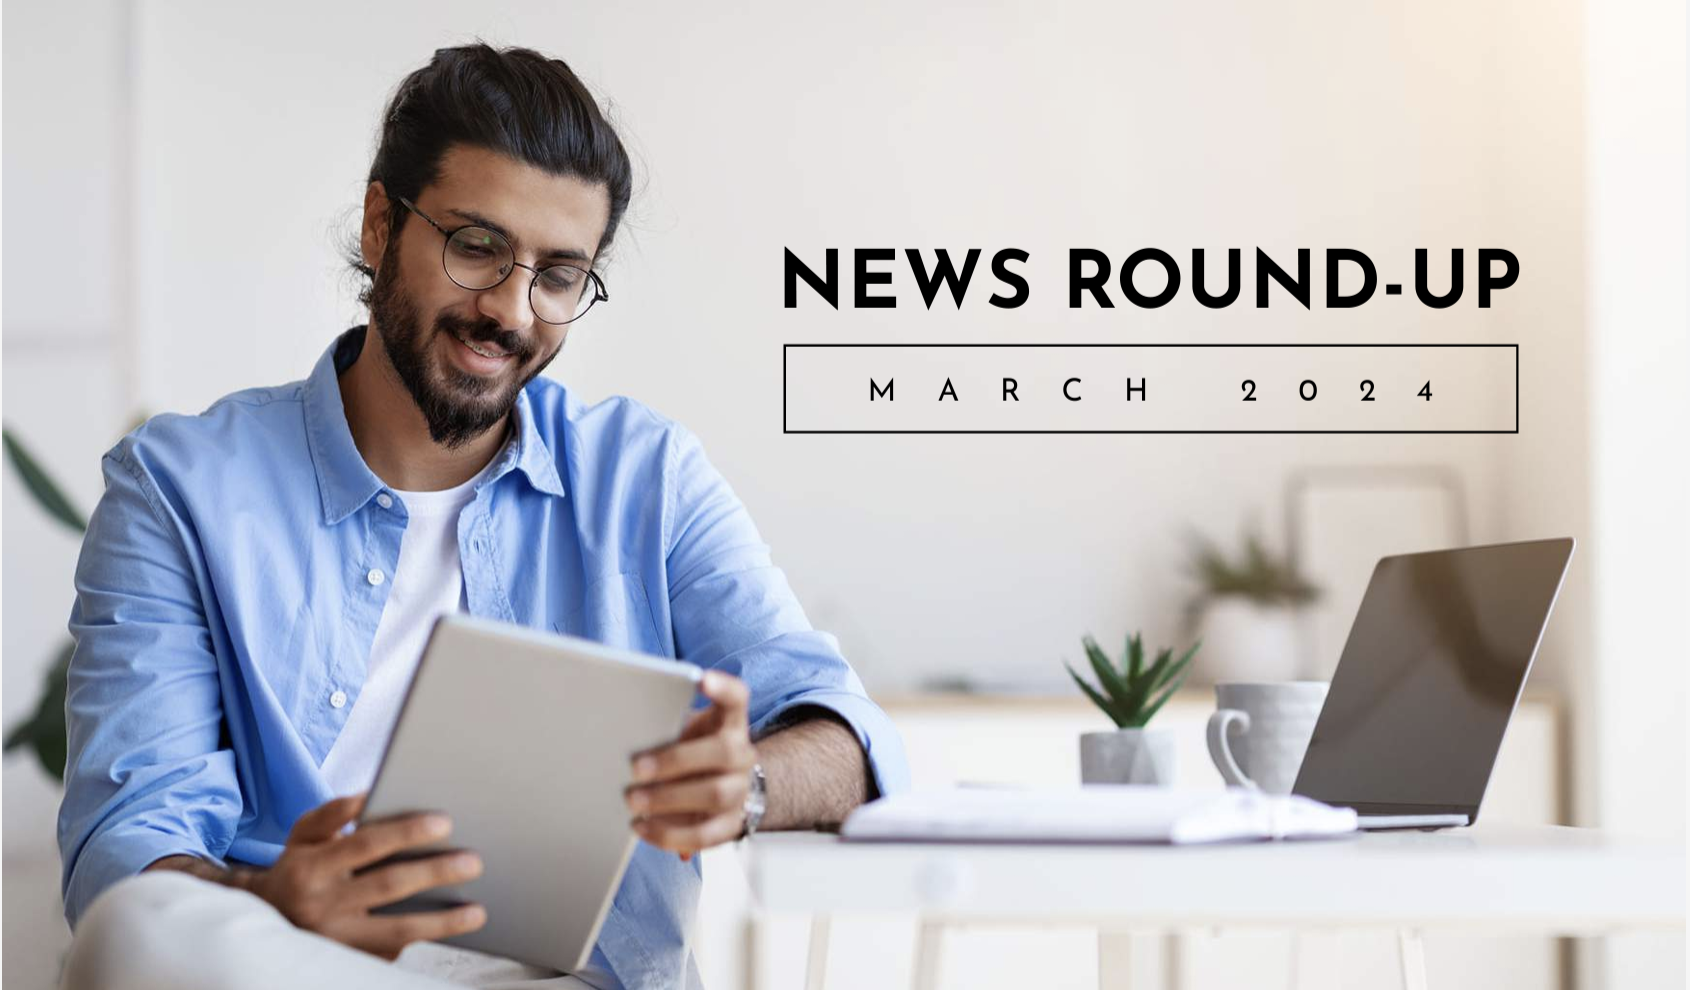 news round up march 2024 happy man looking at ipad at table